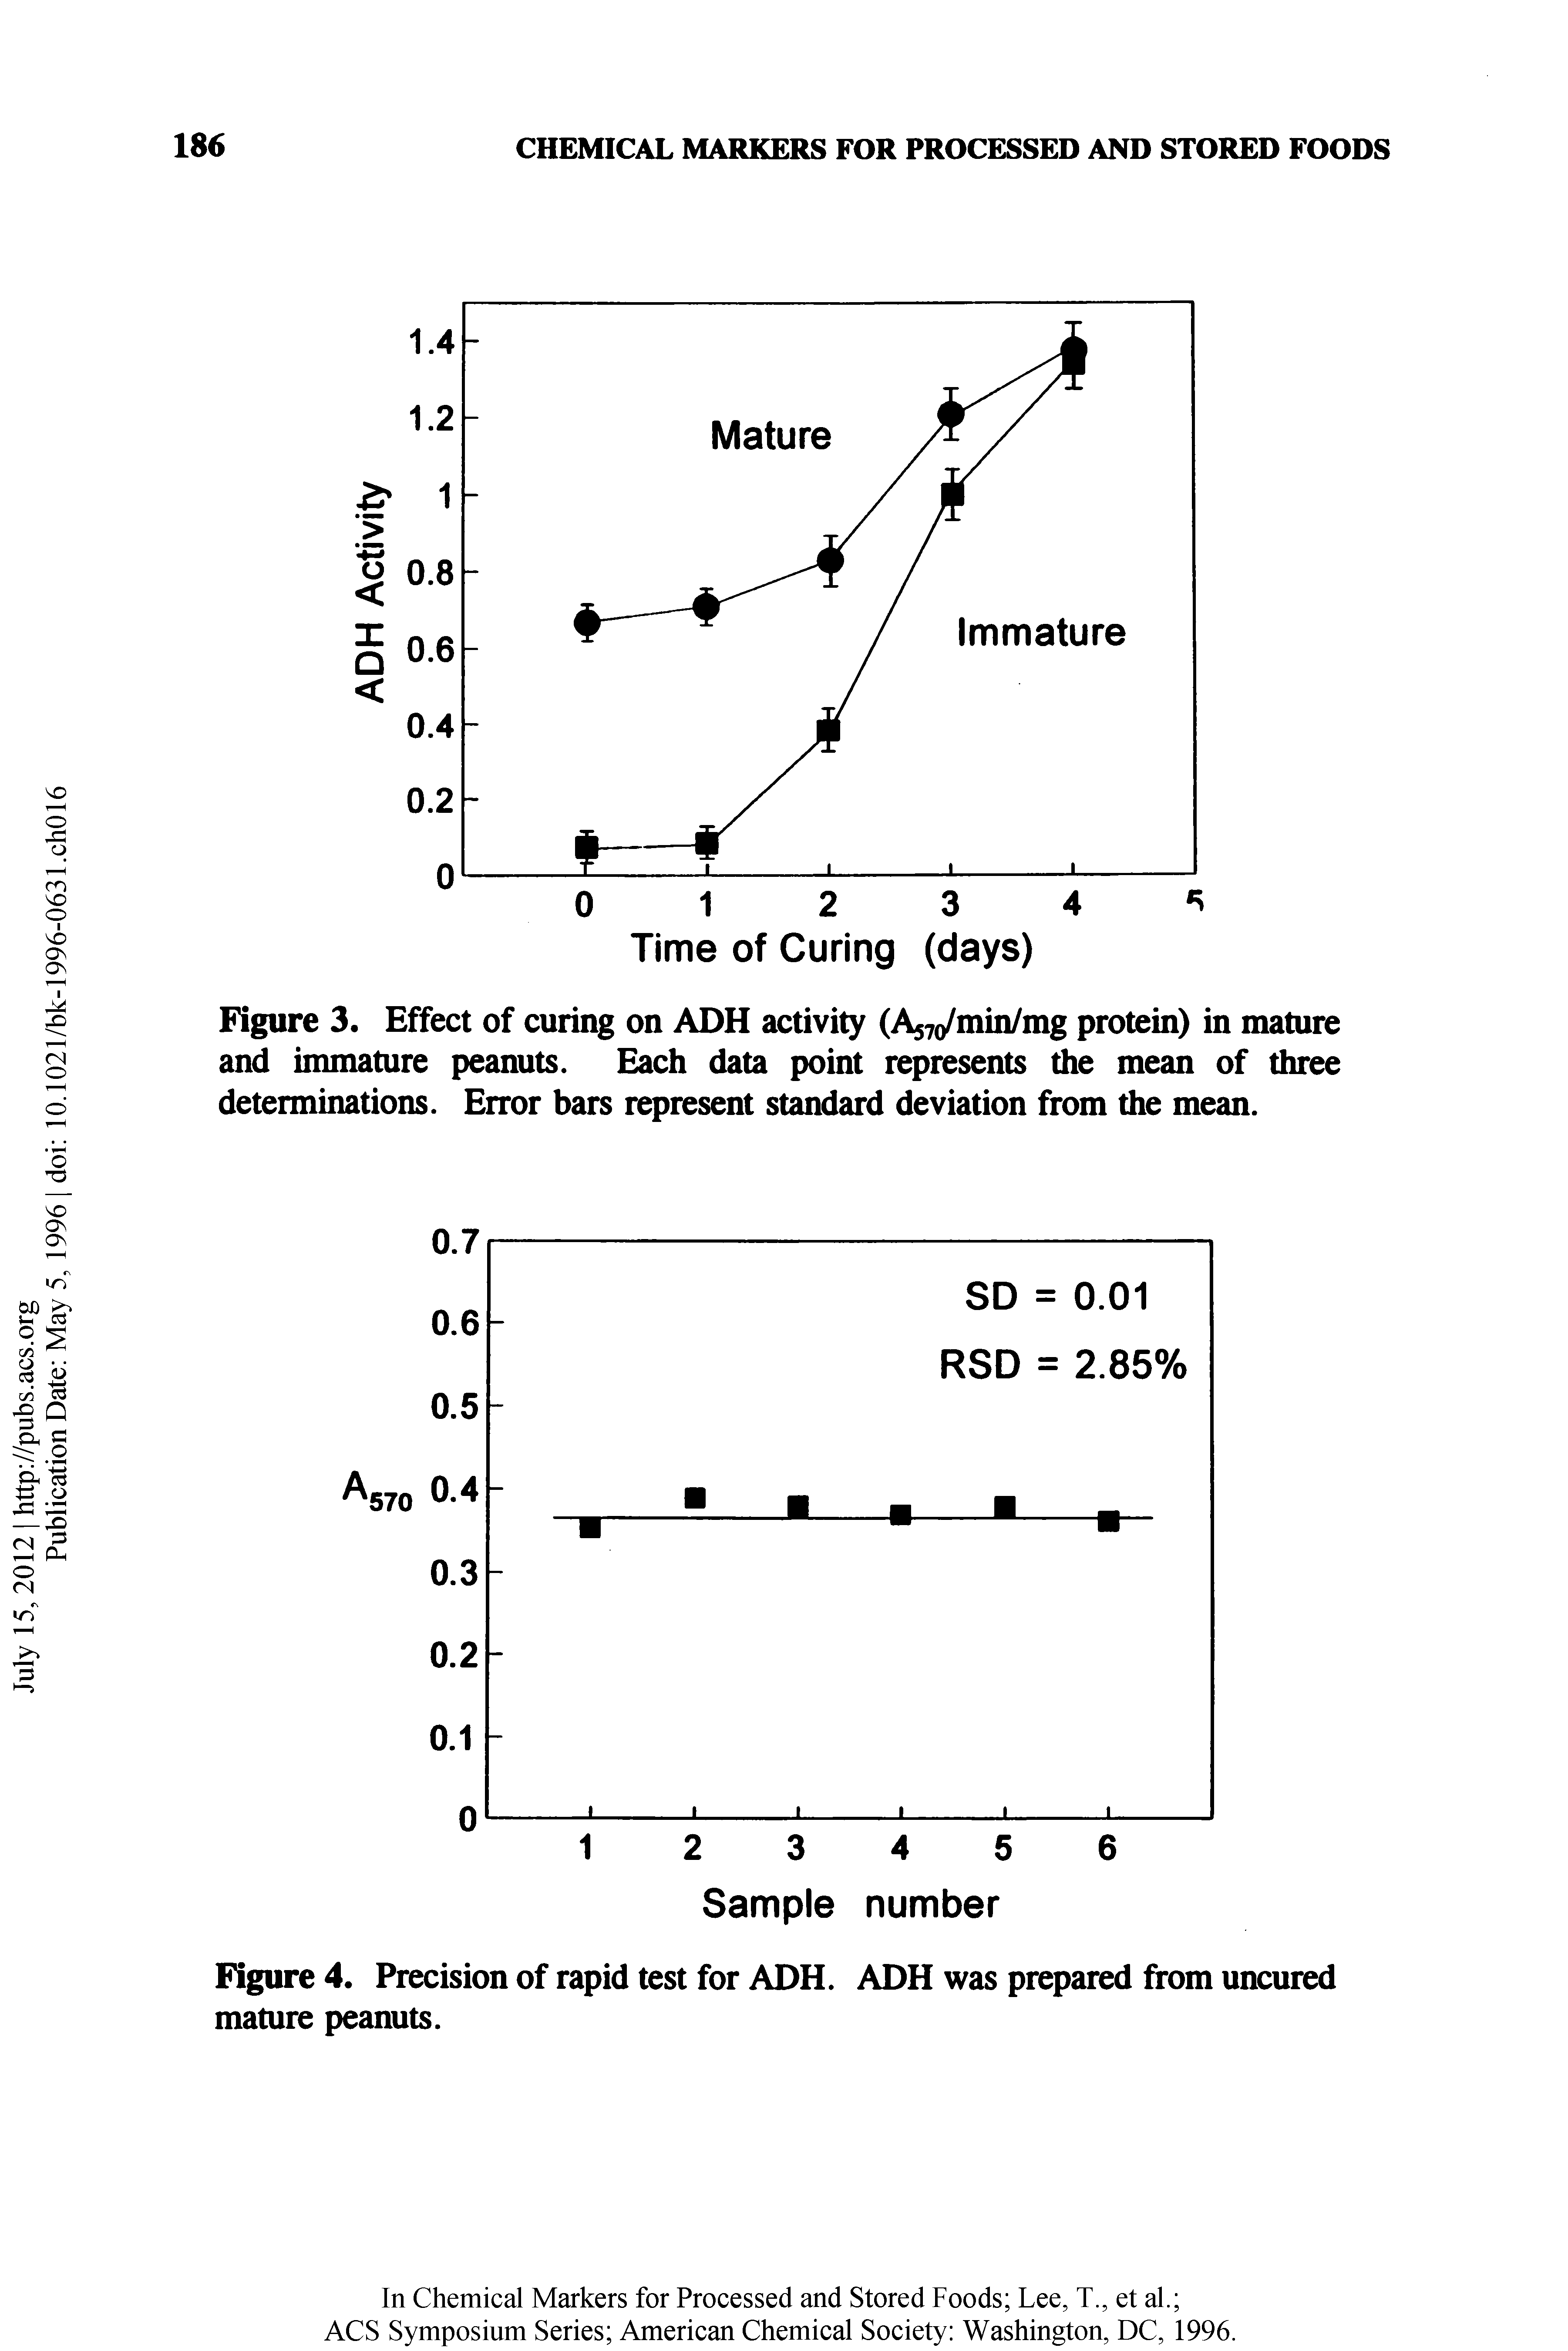 Figure 4. Precision of rapid test for ADH. ADH was prepared from uncured mature peanuts.